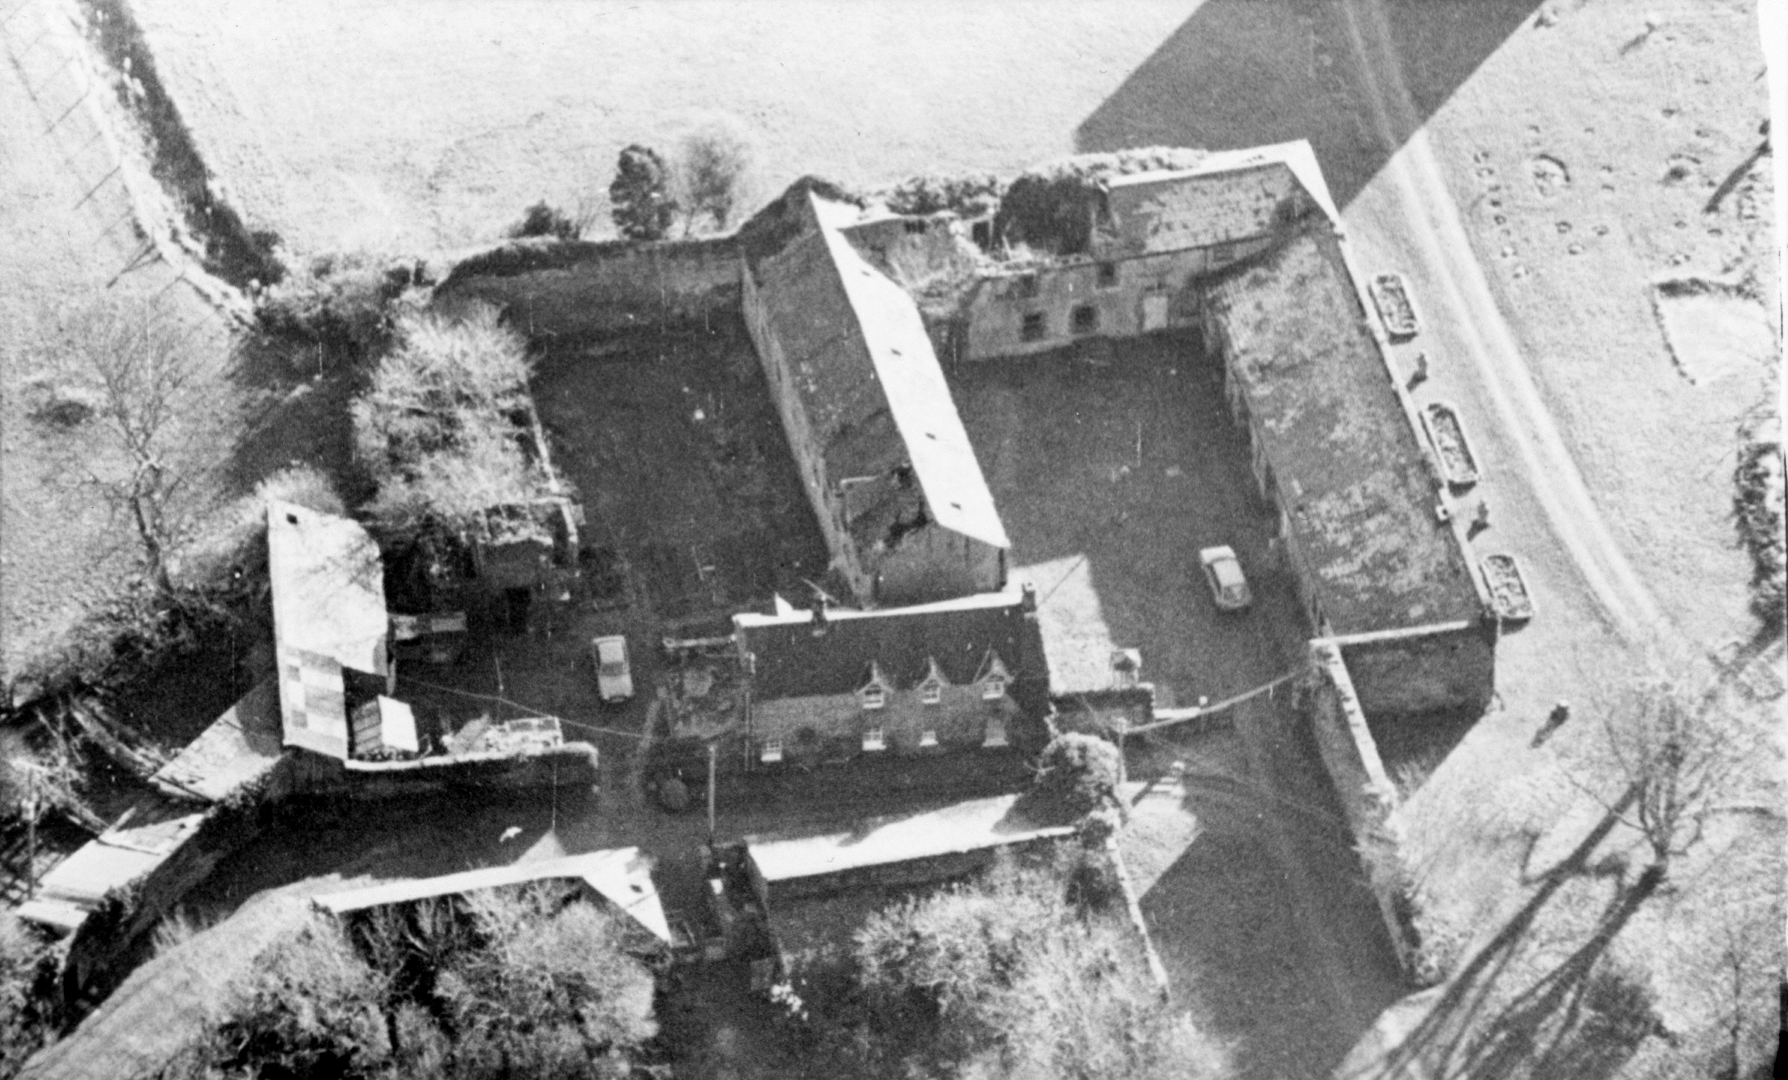 Netherhall view aerial buildings some dereliction shown